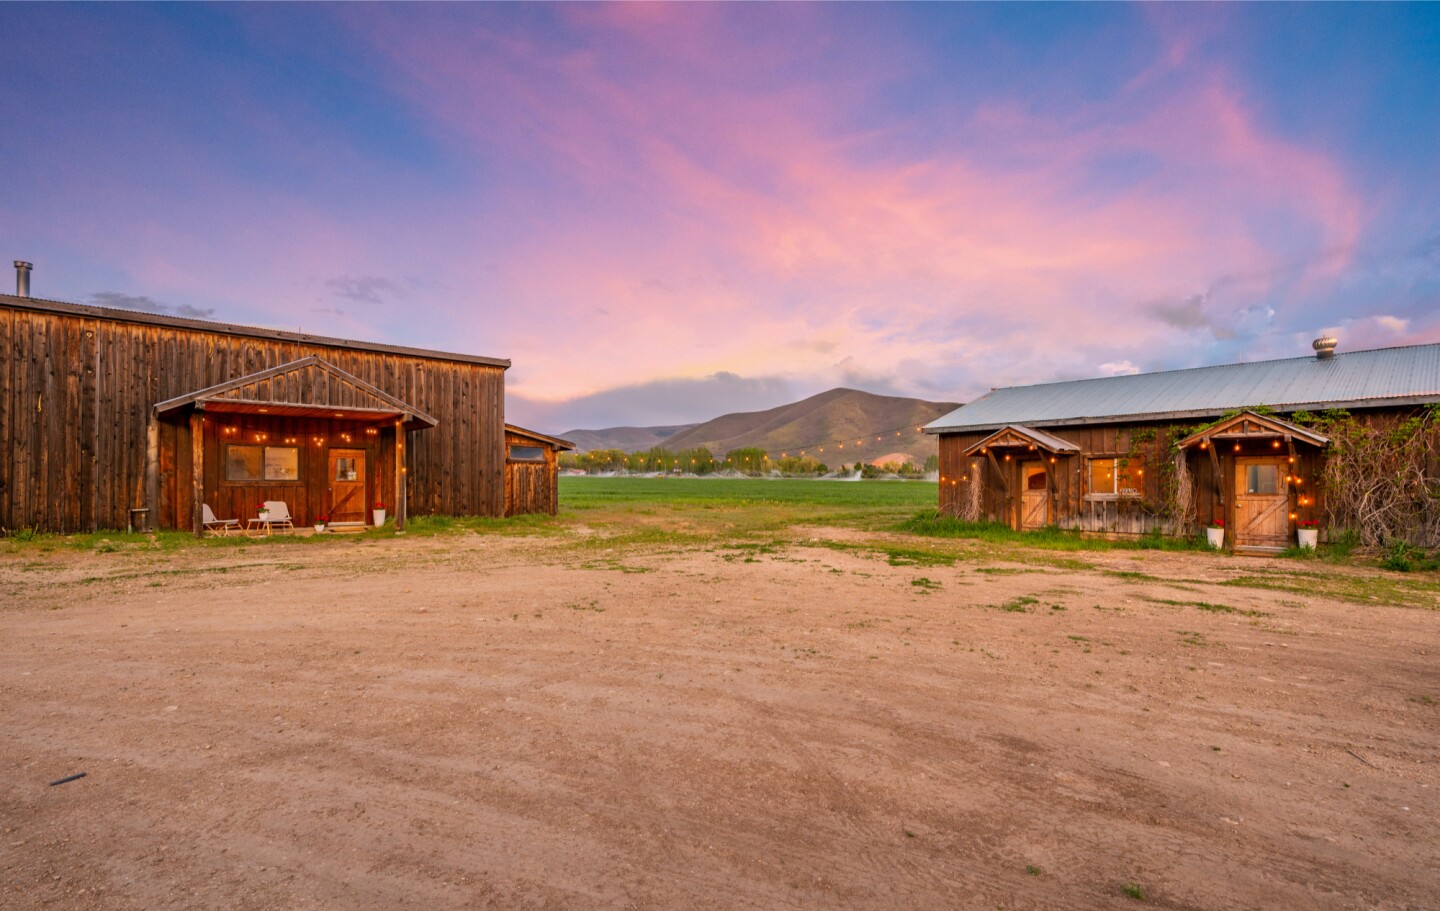 The 30-acre ranch is tucked into a scenic spread of mountains, valleys and rivers.